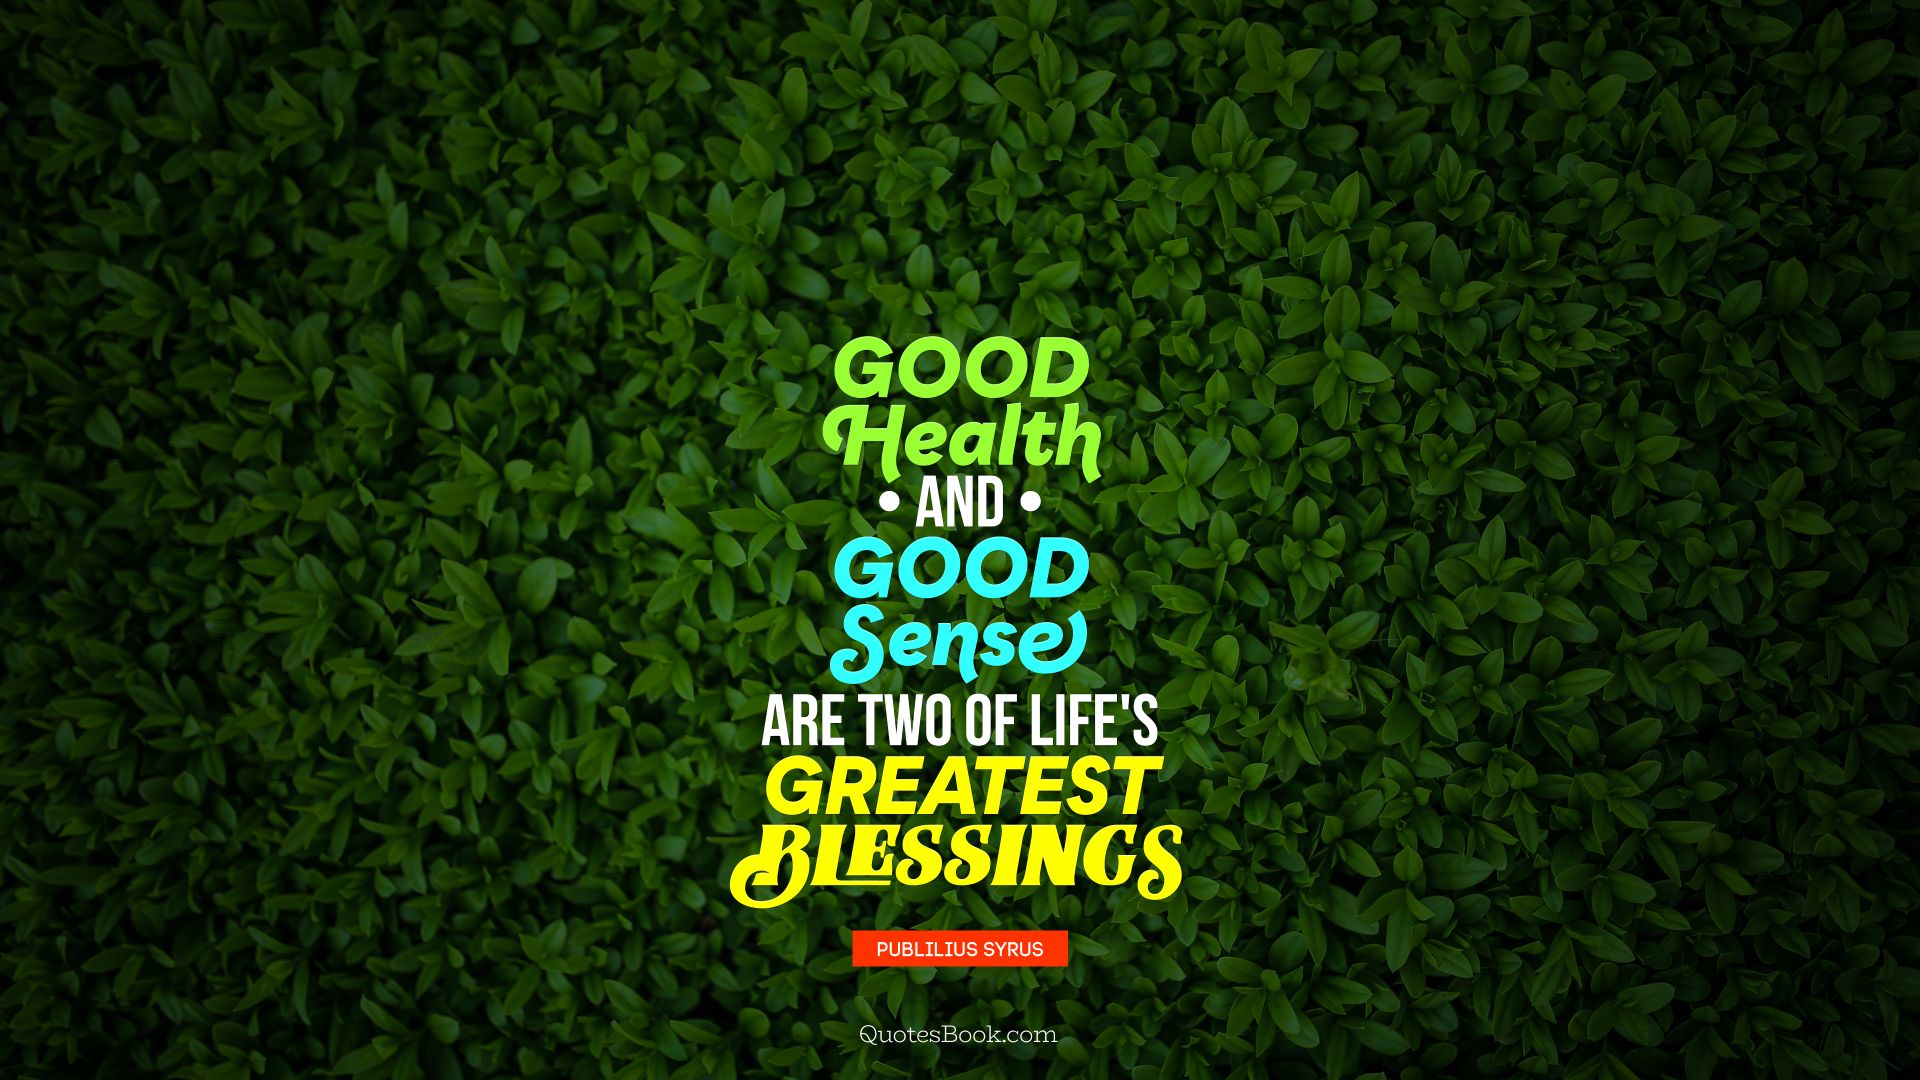 Good health and good sense are two of life's greatest blessings. - Quote by Publilius Syrus